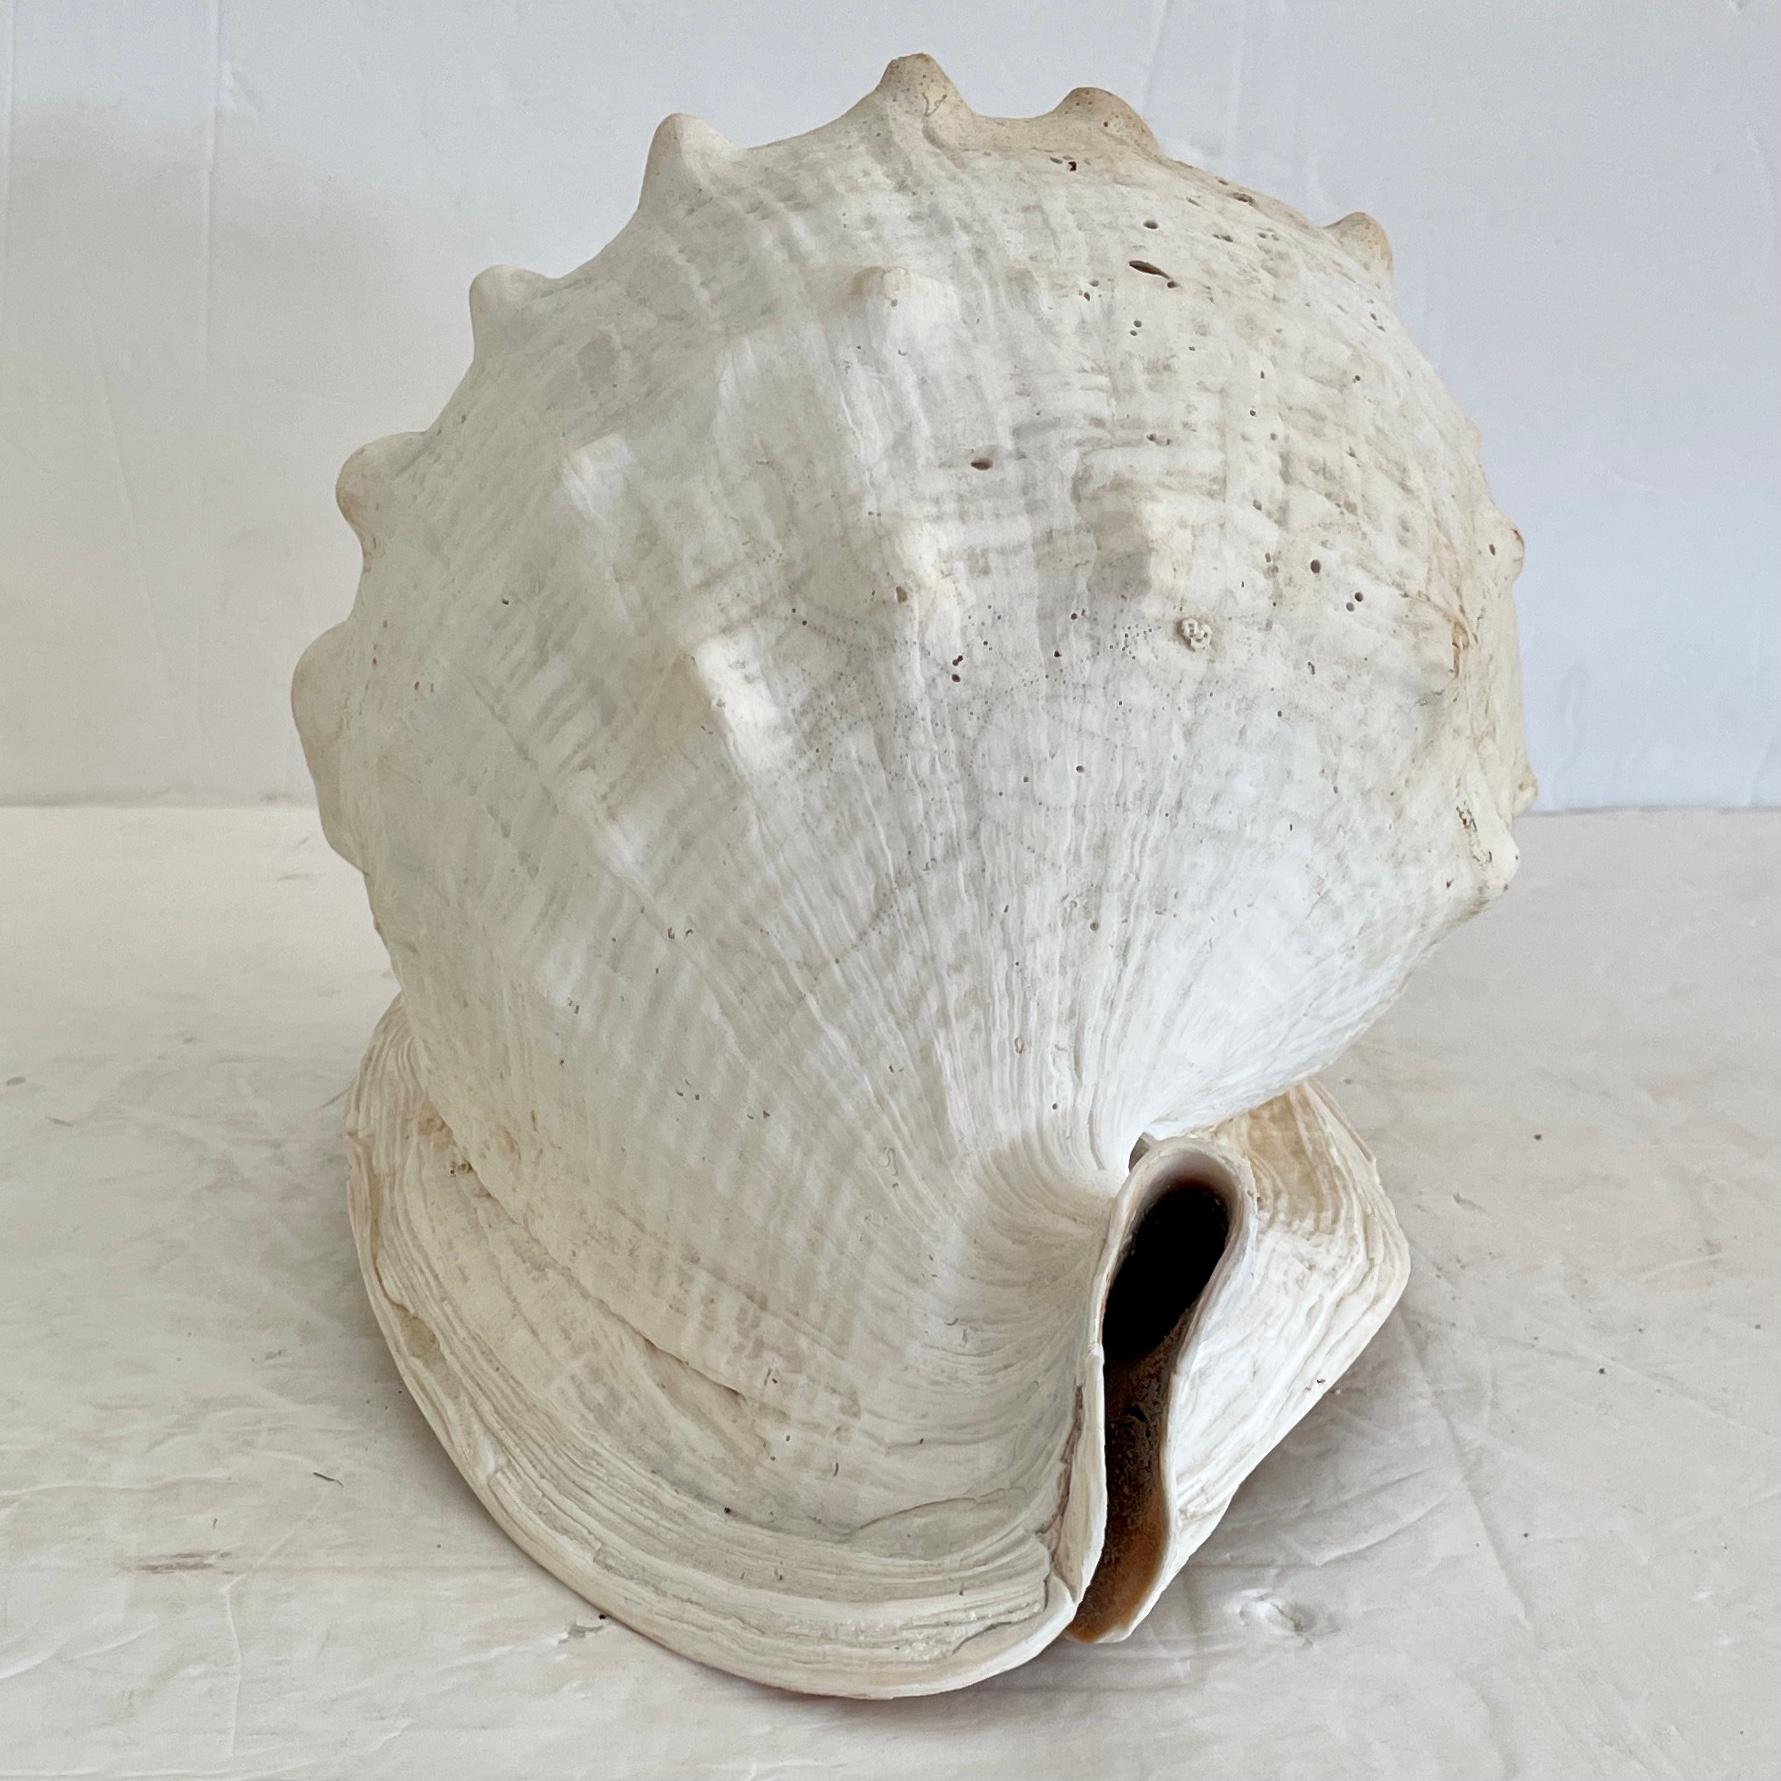 how much is a conch shell worth